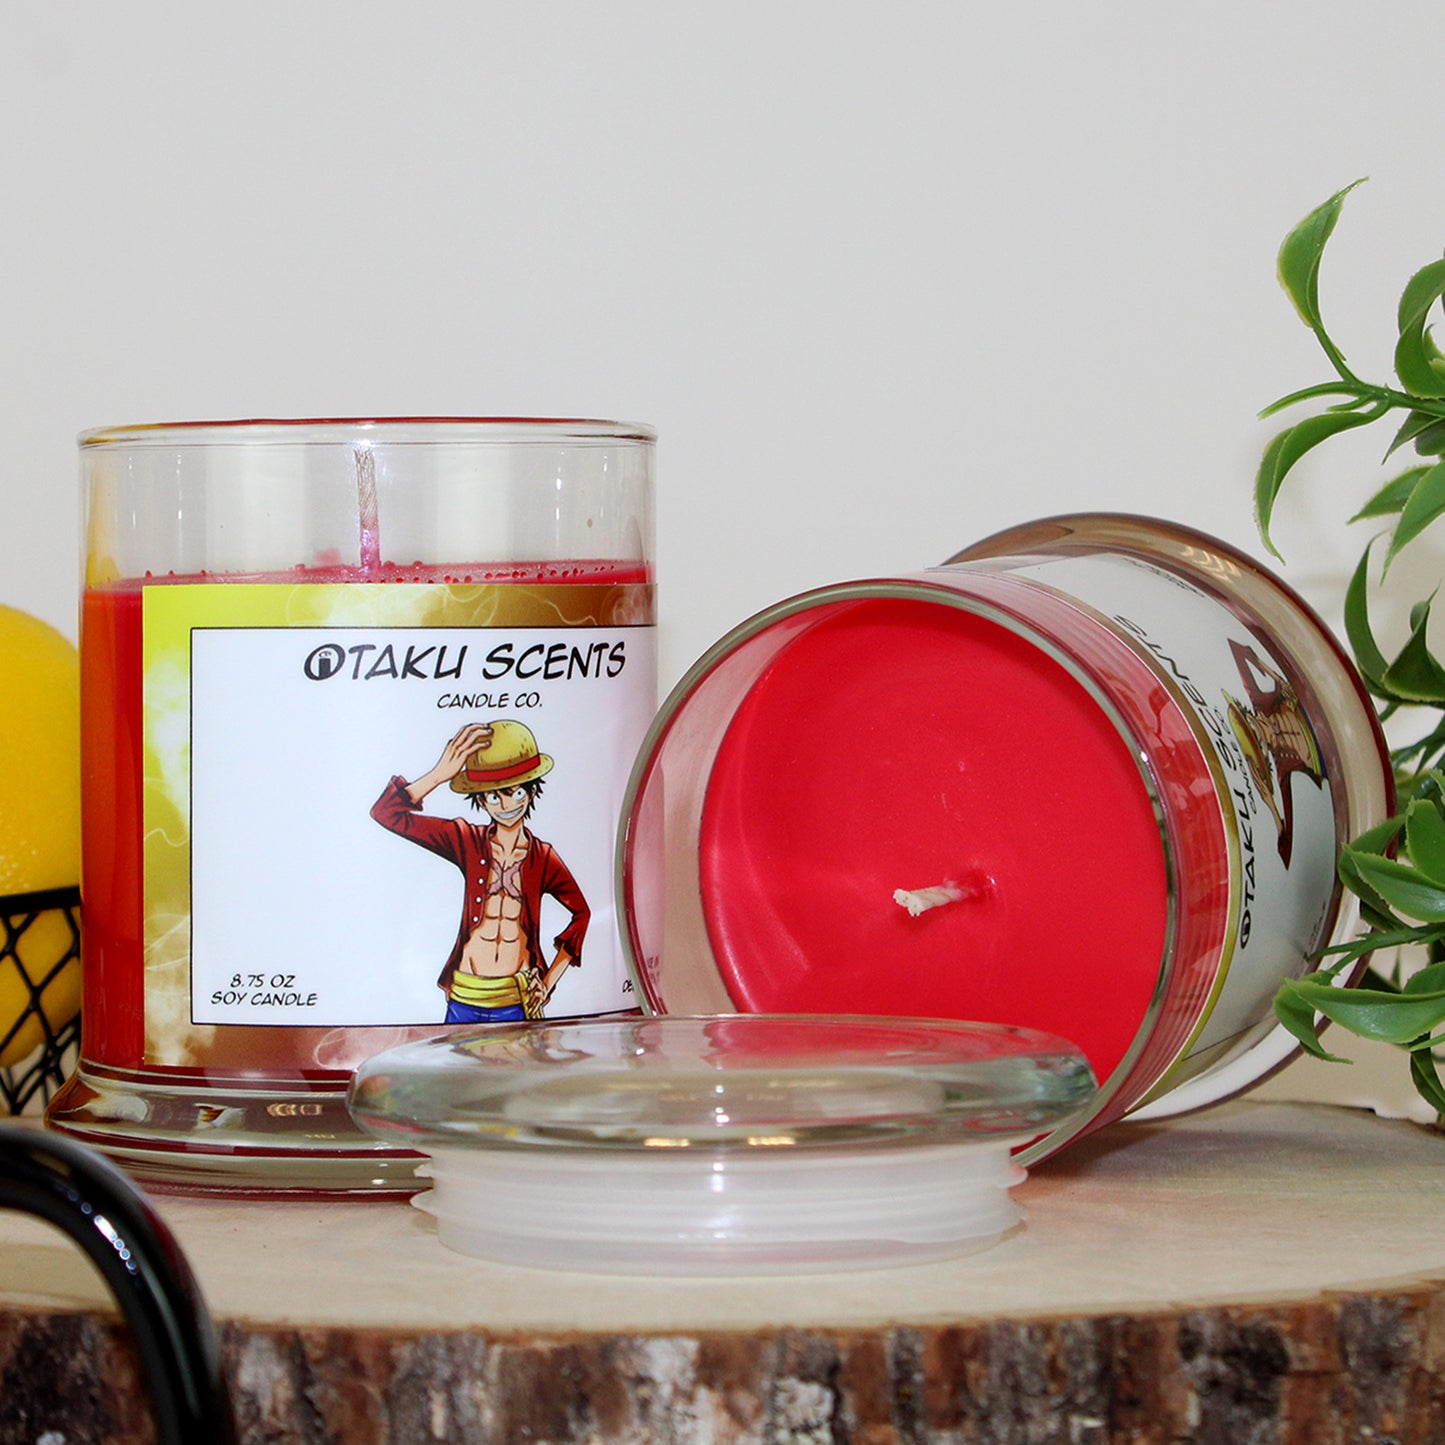 Monkey D Luffy Scented One Piece Candle Jar